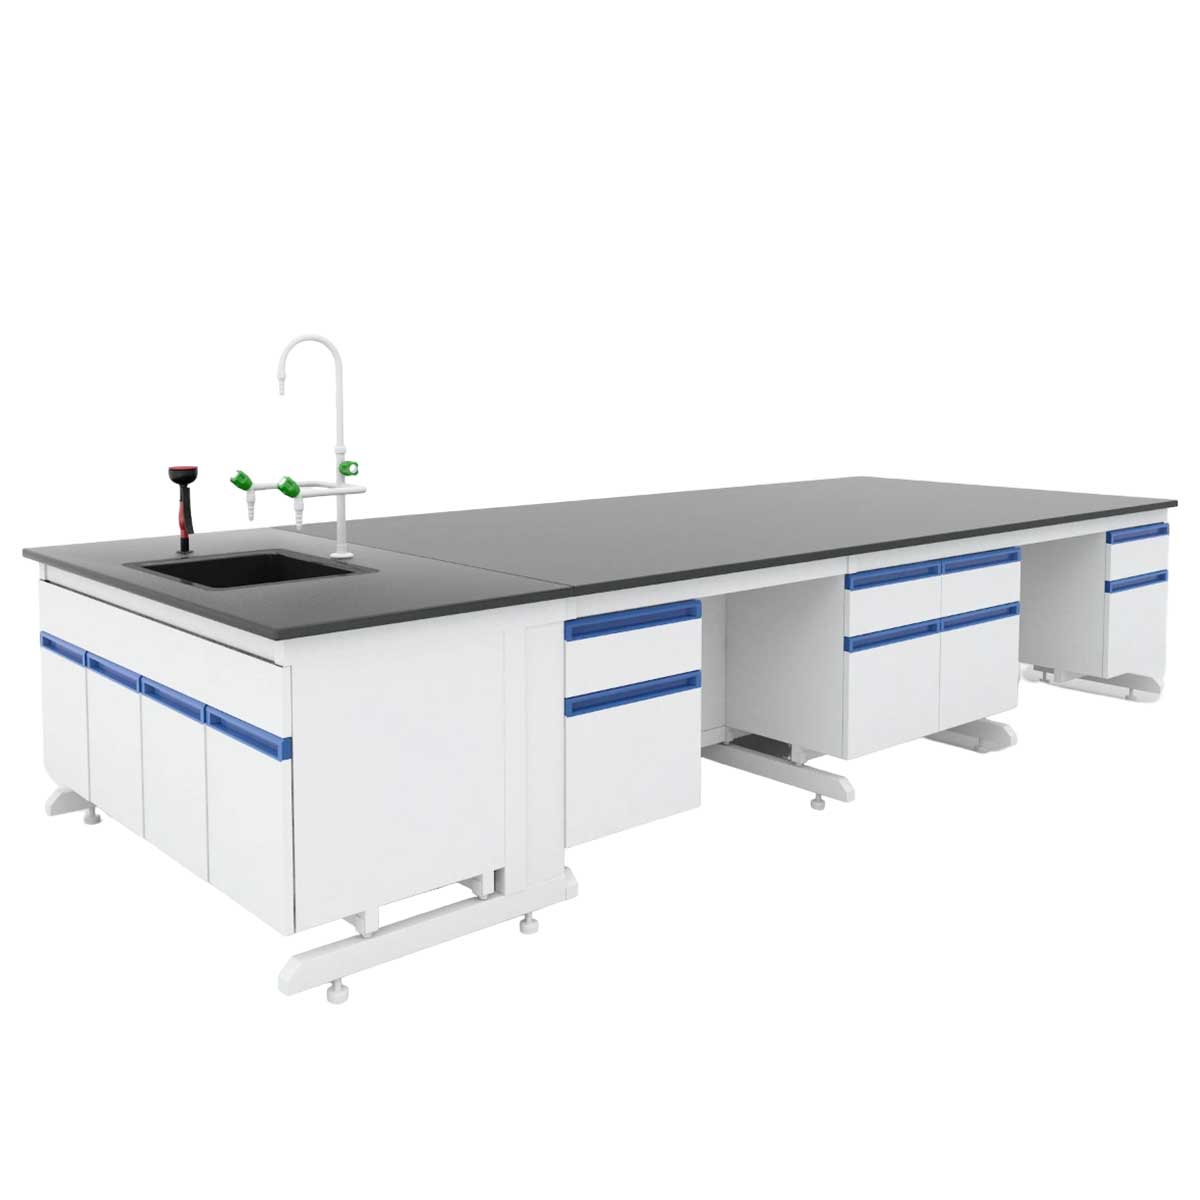 Physics Lab Furniture Manufacturers, Suppliers in Mayur Vihar Phase 1 Extension